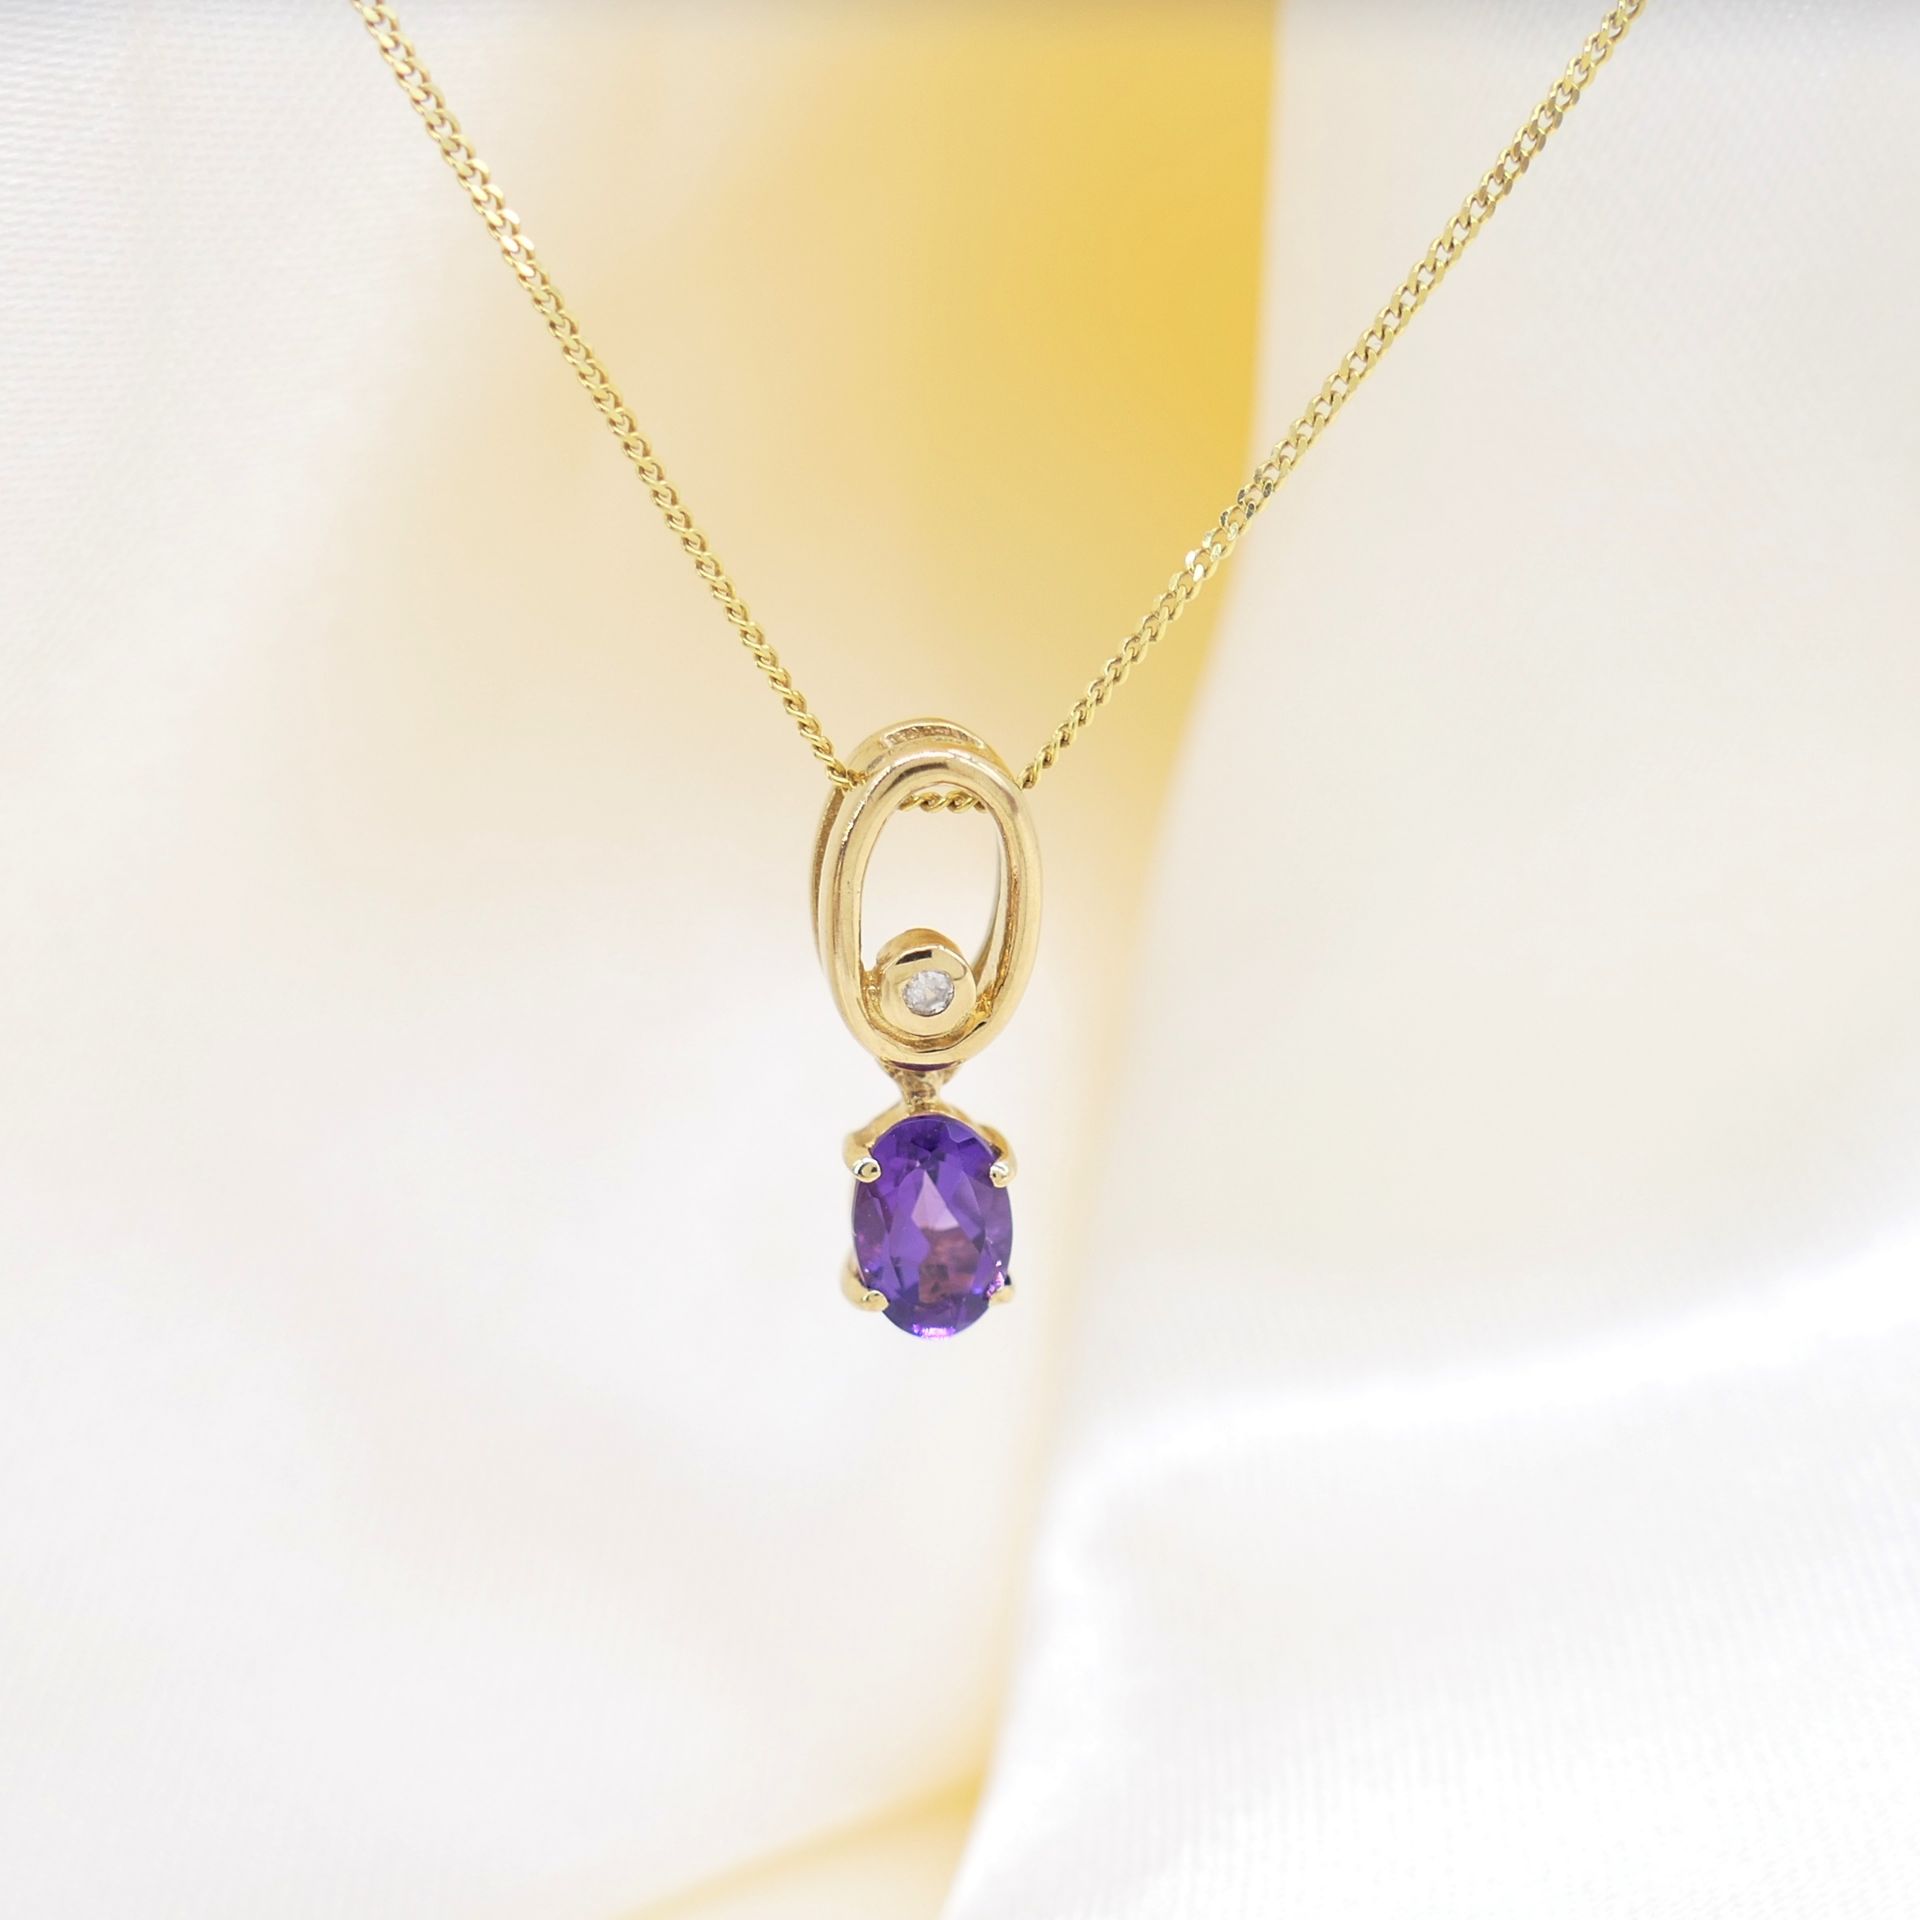 Attractive Yellow Gold Amethyst and Diamond Necklace, Supplied With A Gift Box - Image 2 of 6